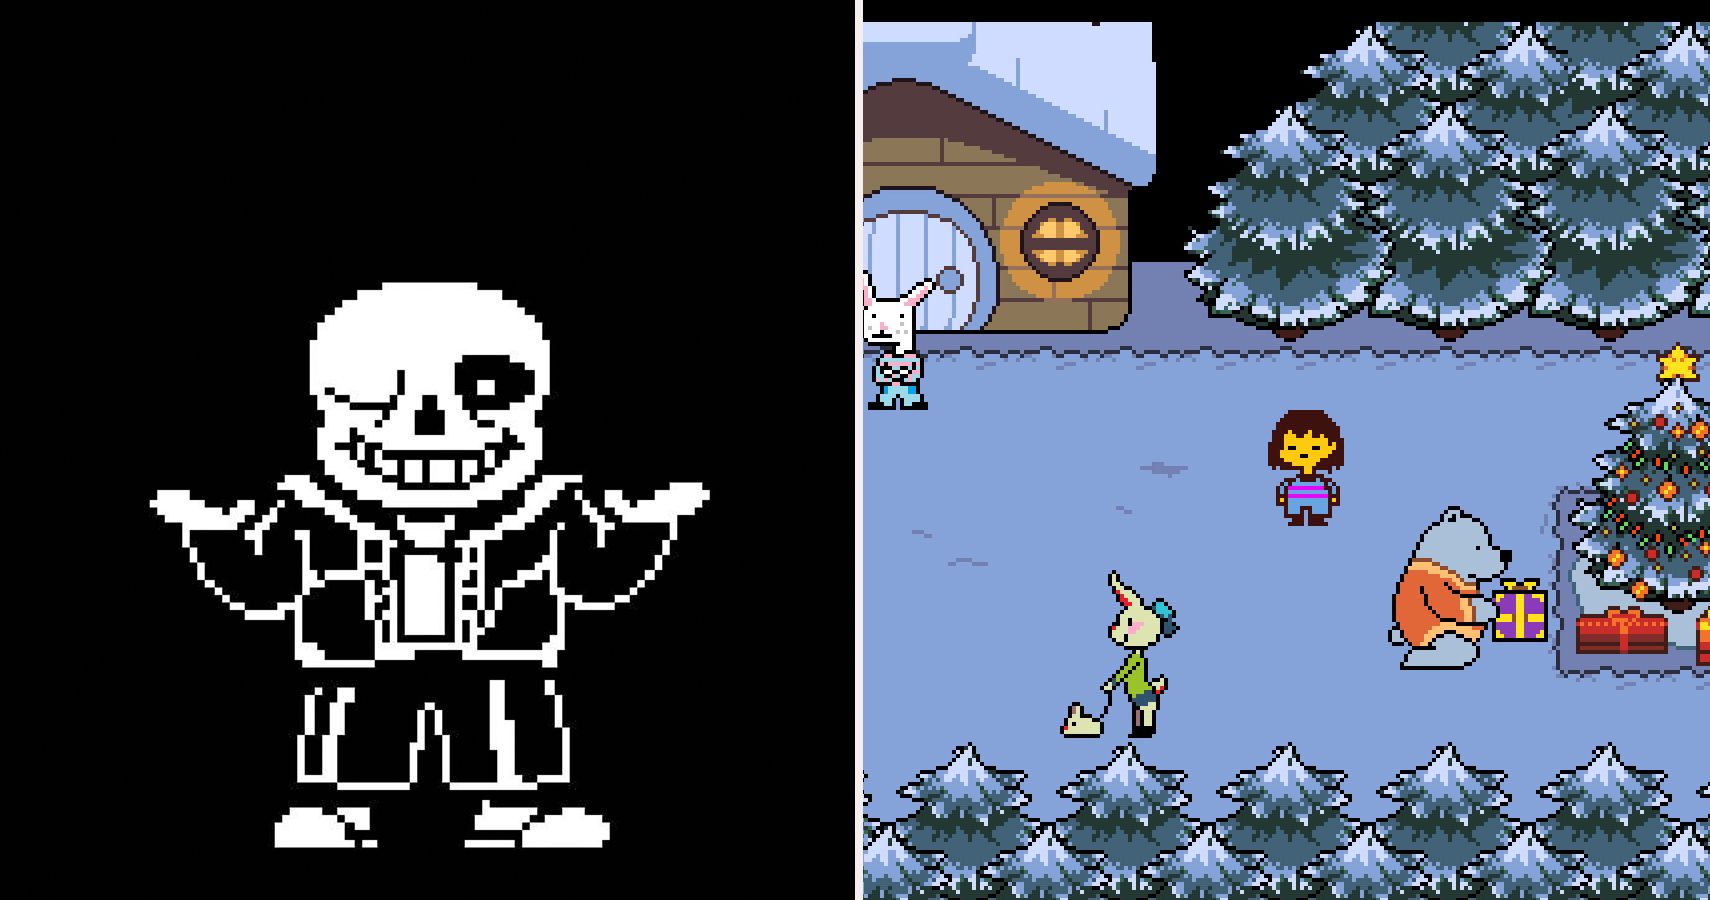 Undertale: 15 Secrets You Didn't Know About